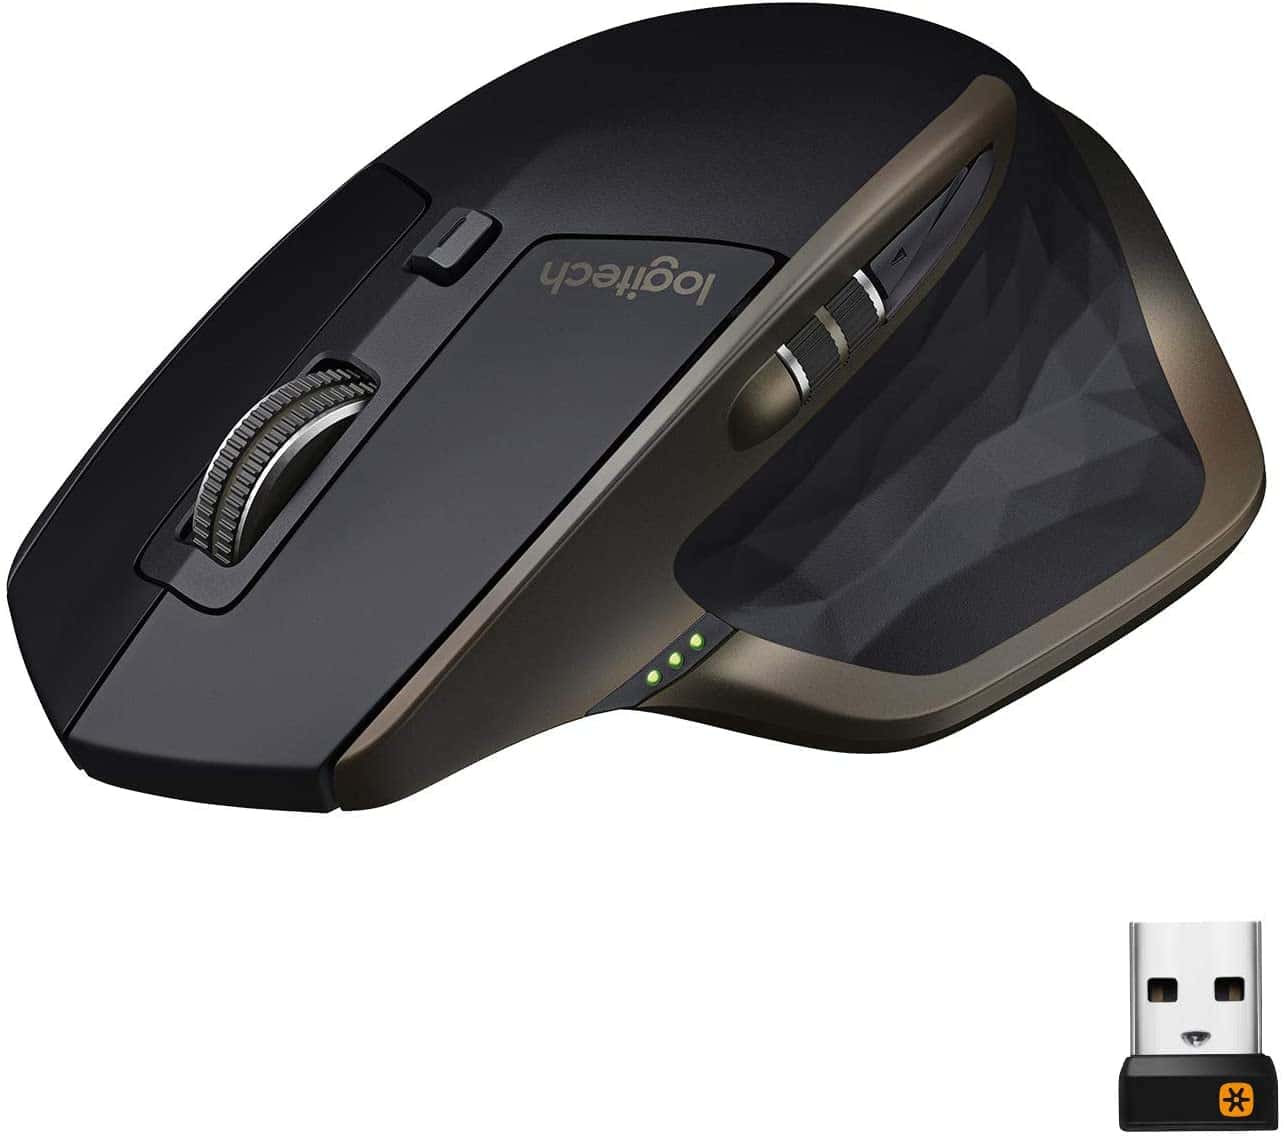 Logitech MX Master Wireless Mouse is now available at $60.40